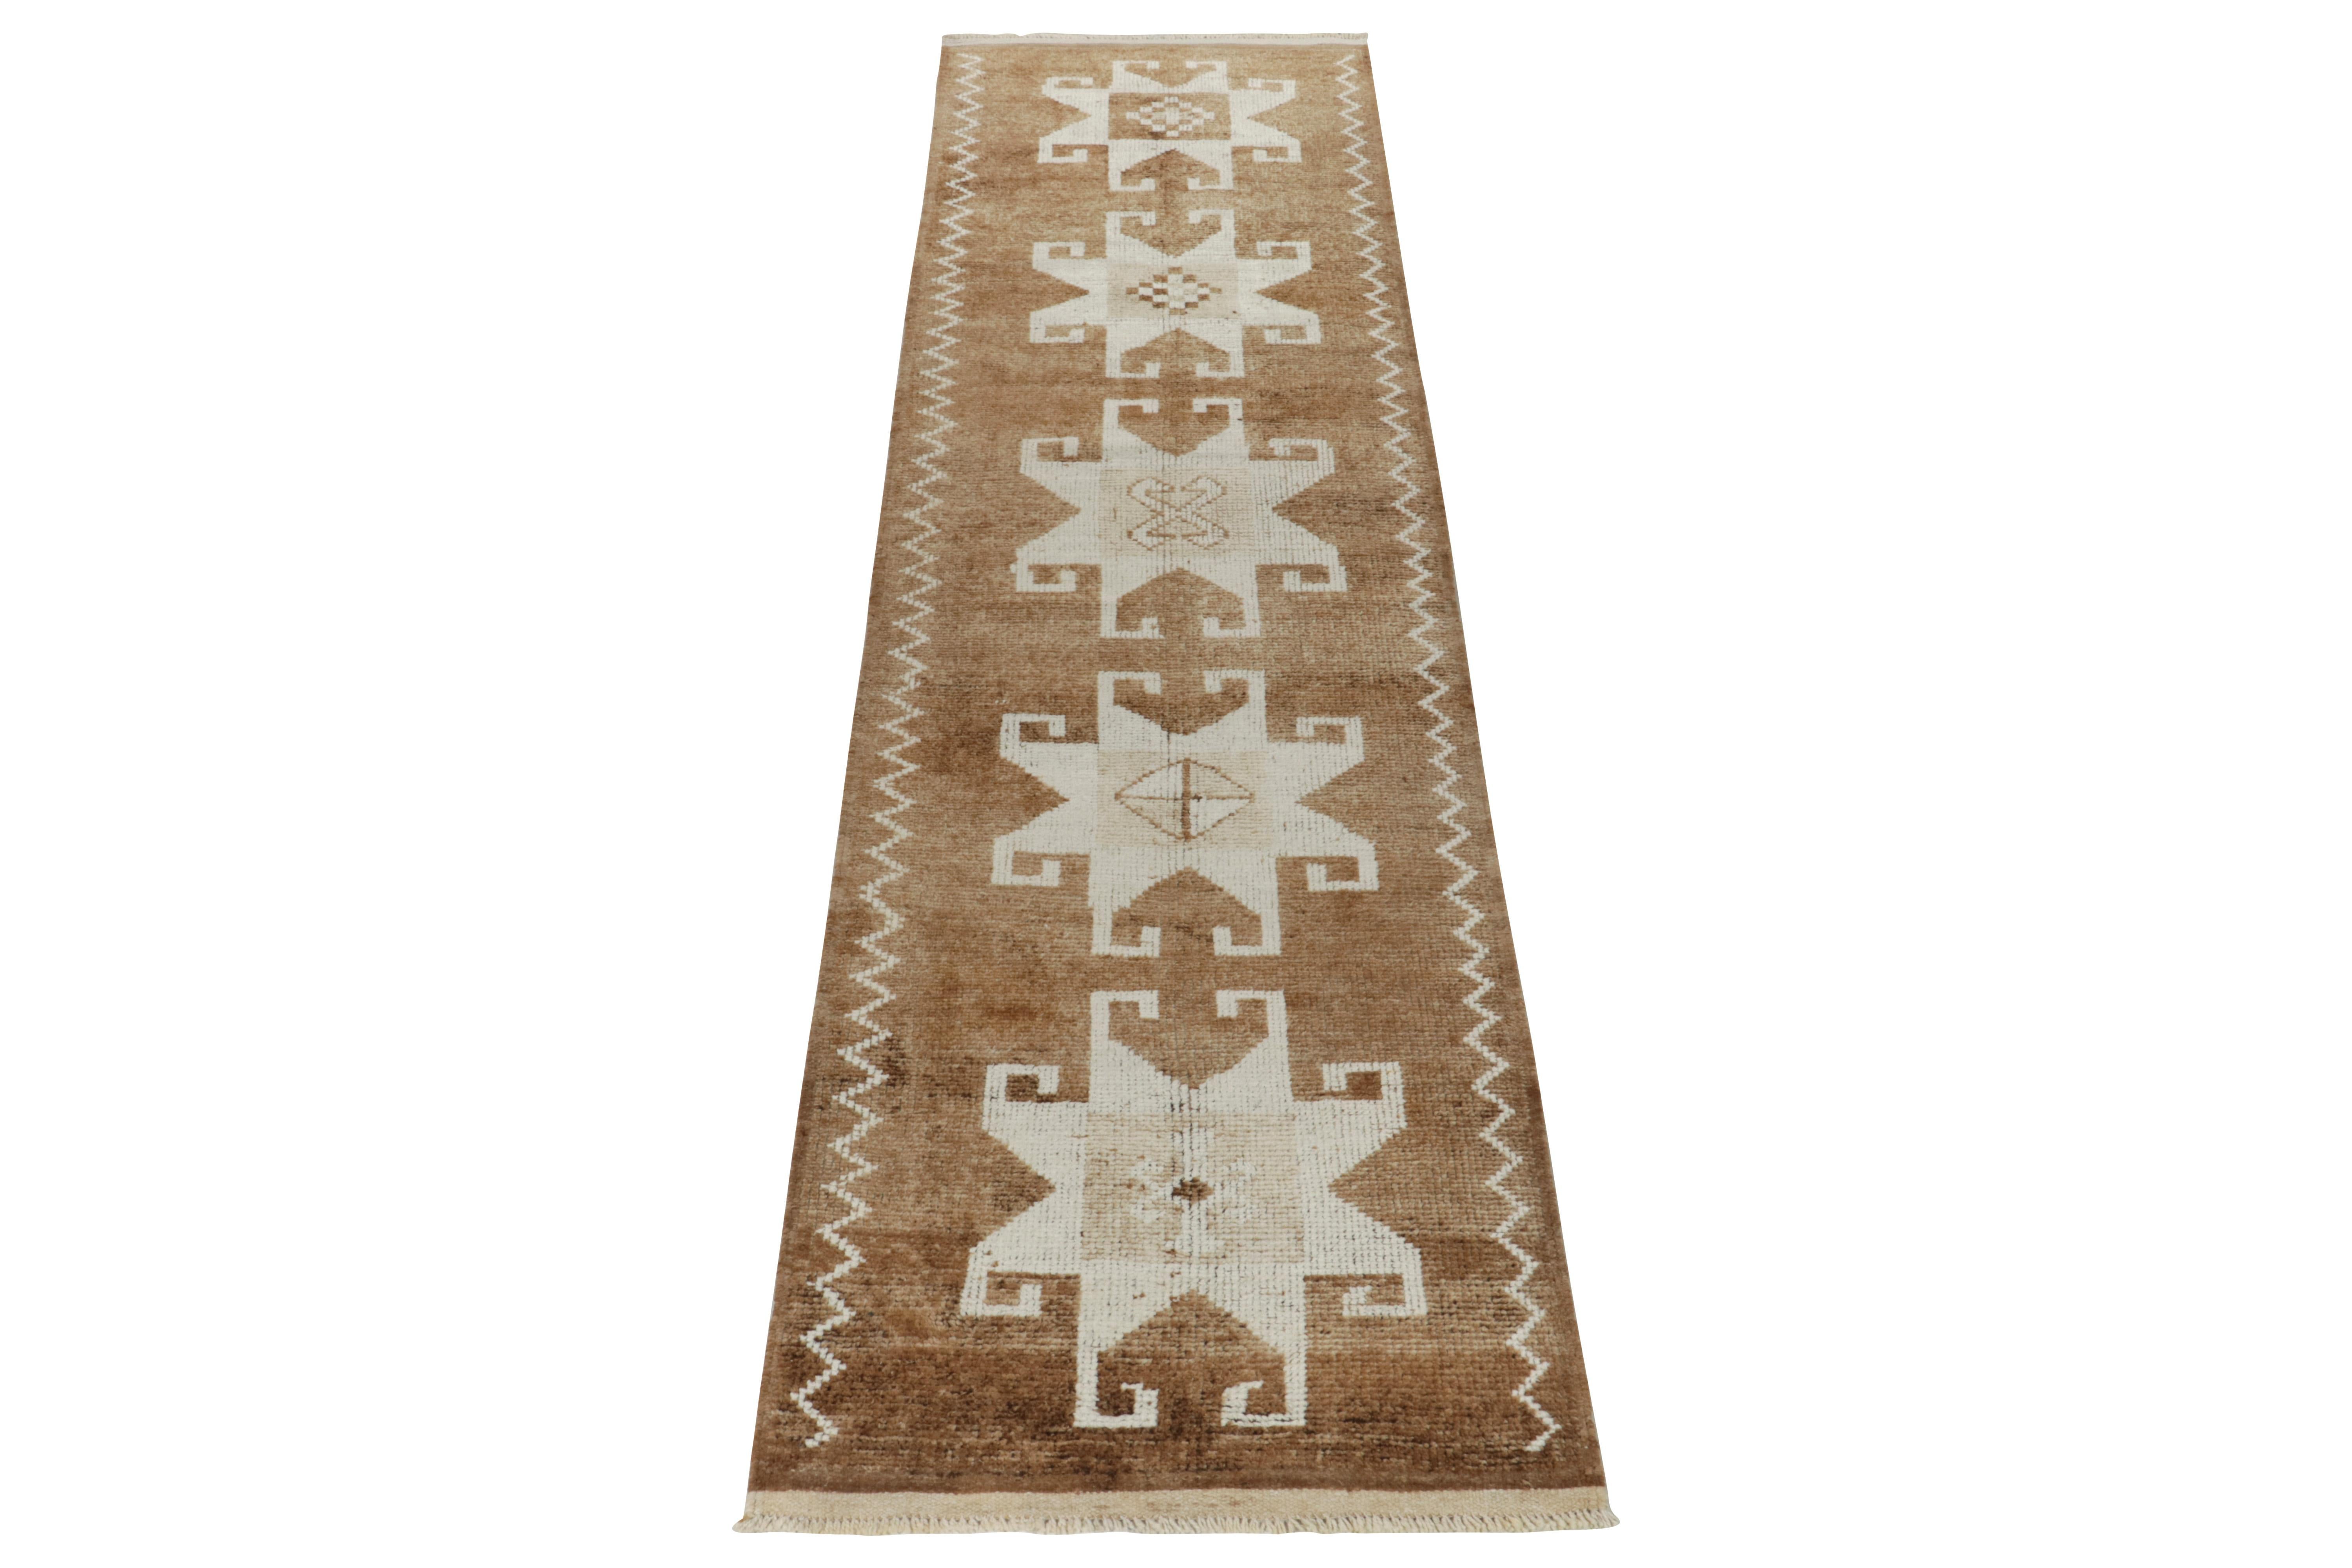 From Rug & Kilim’s vintage selections, a 3x12 hand-knotted wool runner of uniquely bright hues for its nomadic lineage. 

This 1950s tribal piece from Turkey showcases traditional motifs sitting confidently like medallions on the field in crisp